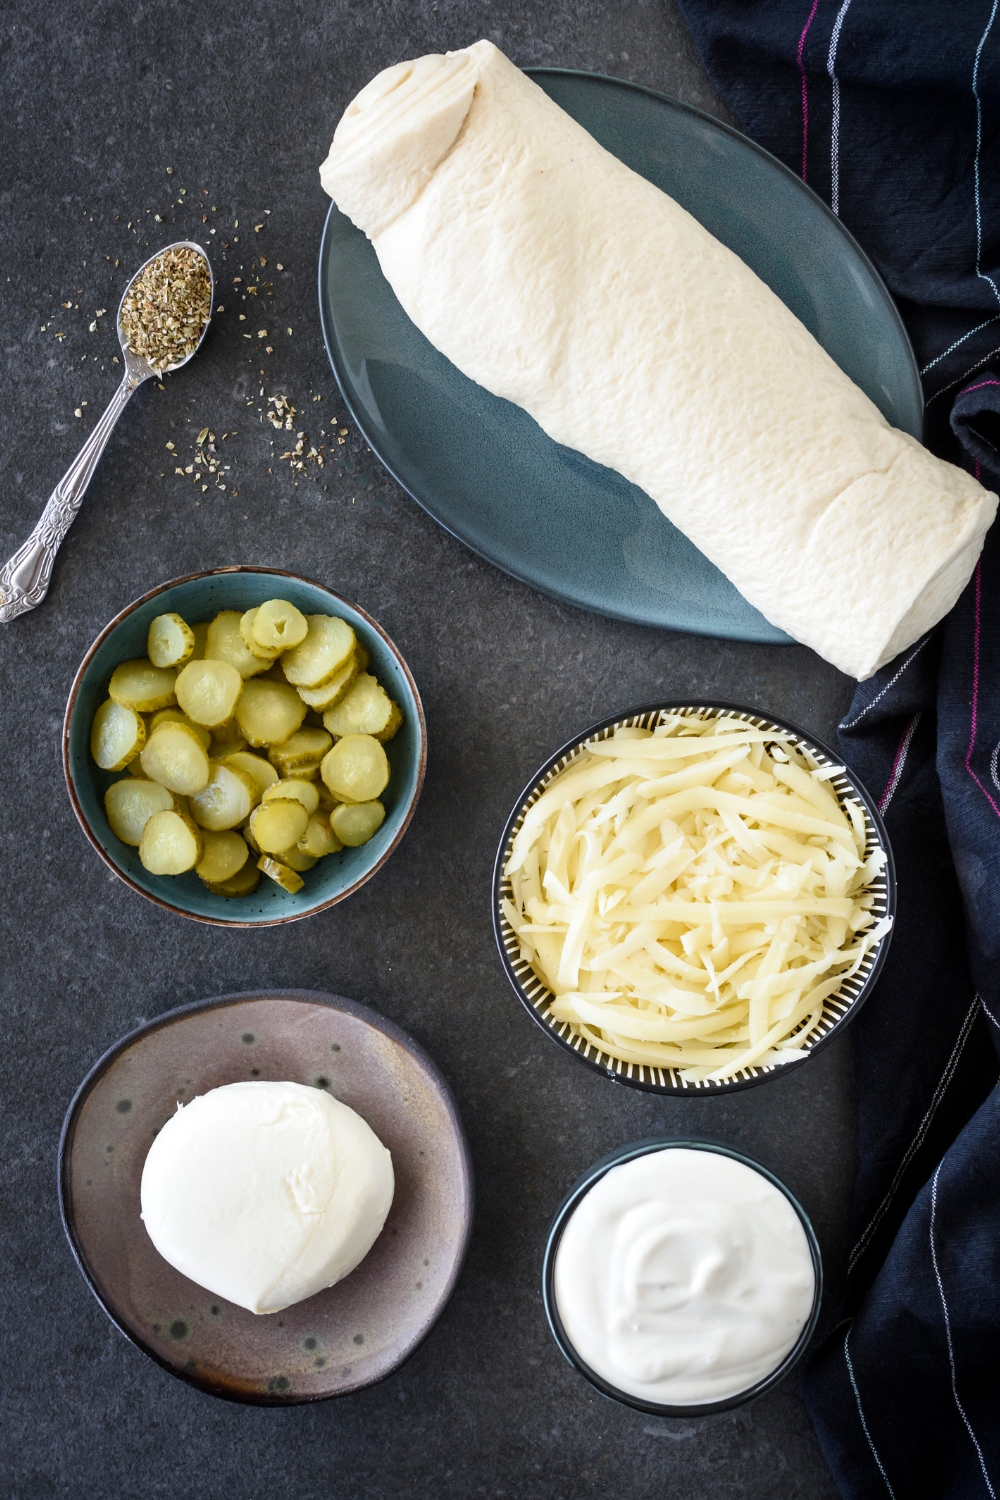 An assortment of ingredients including bowls of sliced pickles, shredded cheese, garlic sauce, a ball of fresh mozzarella, and a roll of pizza dough.